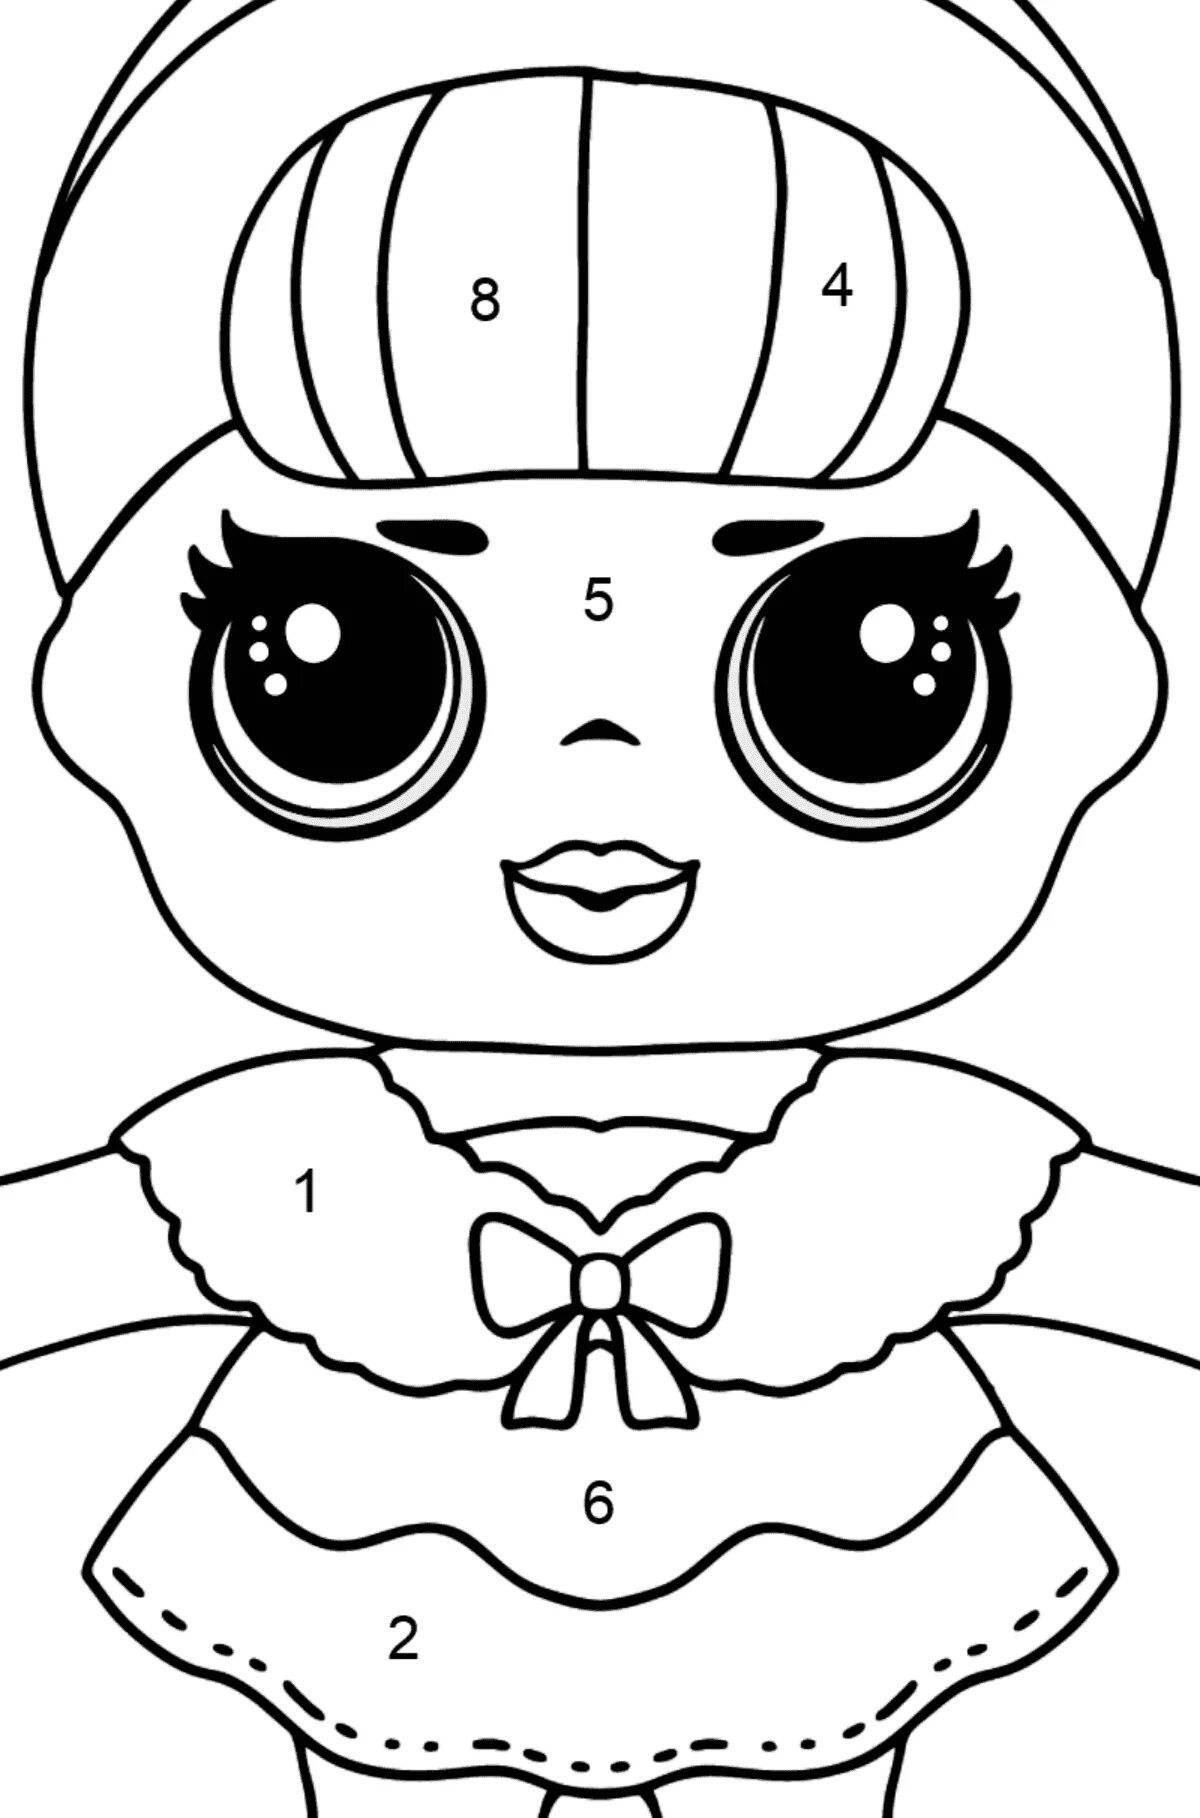 Magic lol doll coloring by numbers